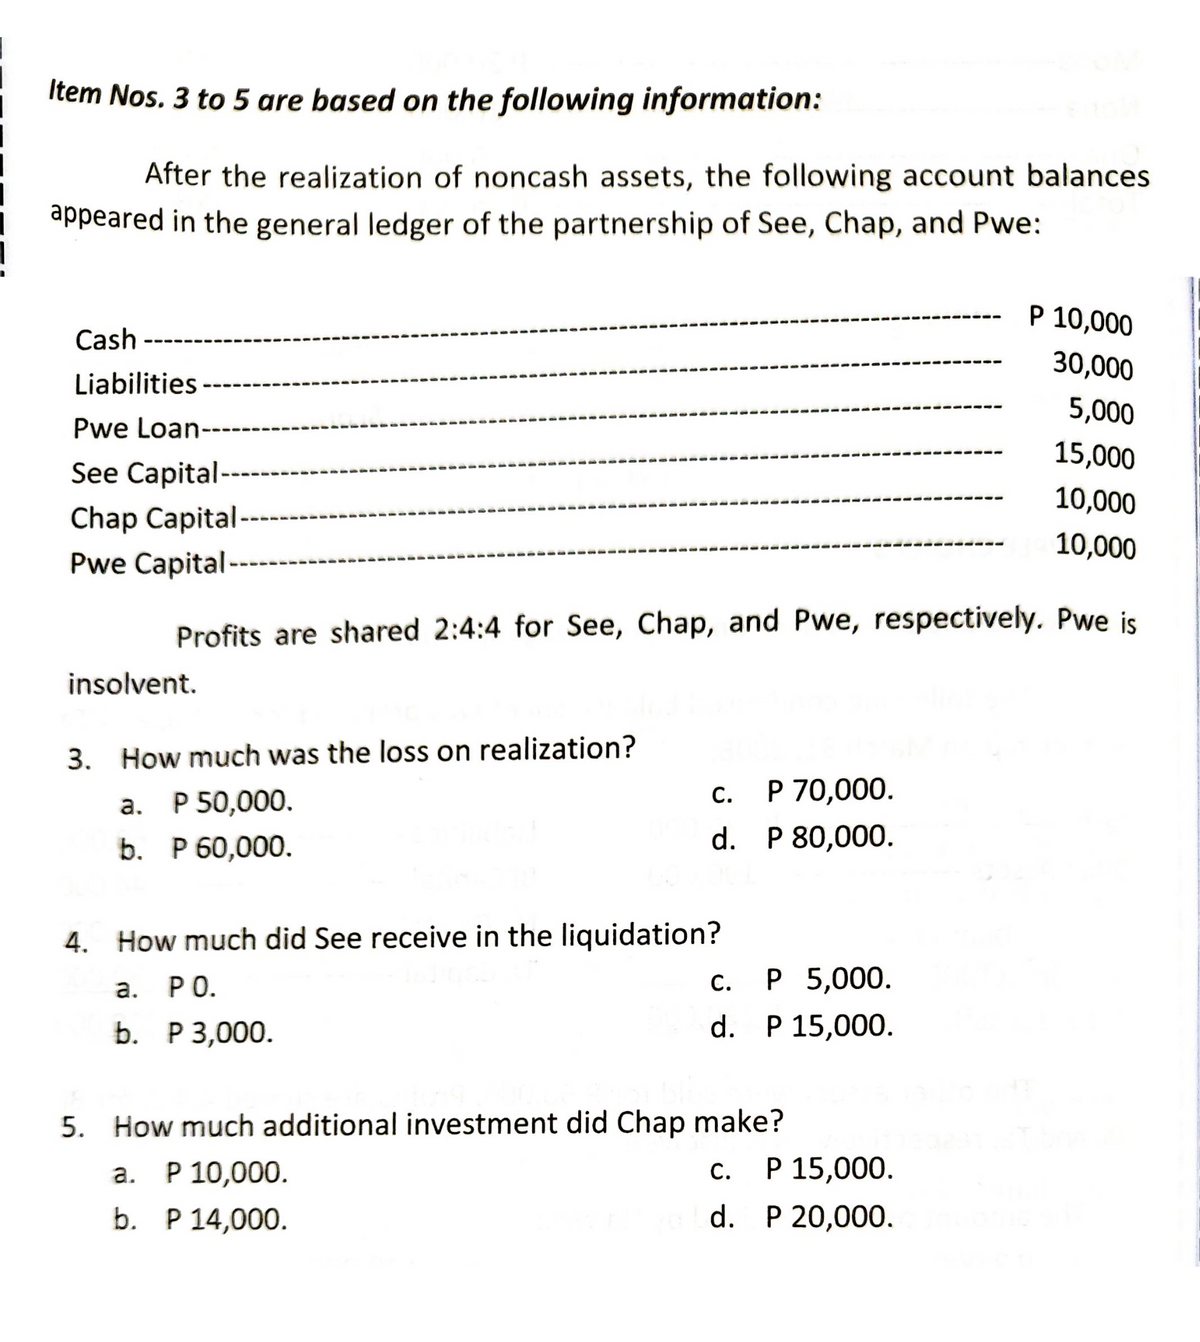 Item Nos. 3 to 5 are based on the following information:
After the realization of noncash assets, the following account balances
appeared in the general ledger of the partnership of See, Chap, and Pwe:
P 10,000
Cash
30,000
Liabilities
5,000
Pwe Loan-
15,000
See Capital-
10,000
Chap Capital-
10,000
Pwe Capital-
Profits are shared 2:4:4 for See, Chap, and Pwe, respectively. Pwe is
insolvent.
3. How much was the loss on realization?
C. P 70,000.
a. P 50,000.
d. P 80,000.
b. P 60,000.
4. How much did See receive in the liquidation?
C.
P 5,000.
a. PO.
d. P 15,000.
b. P 3,000.
5. How much additional investment did Chap make?
a. P 10,000.
C. P 15,000.
b. P 14,000.
d. P 20,000.